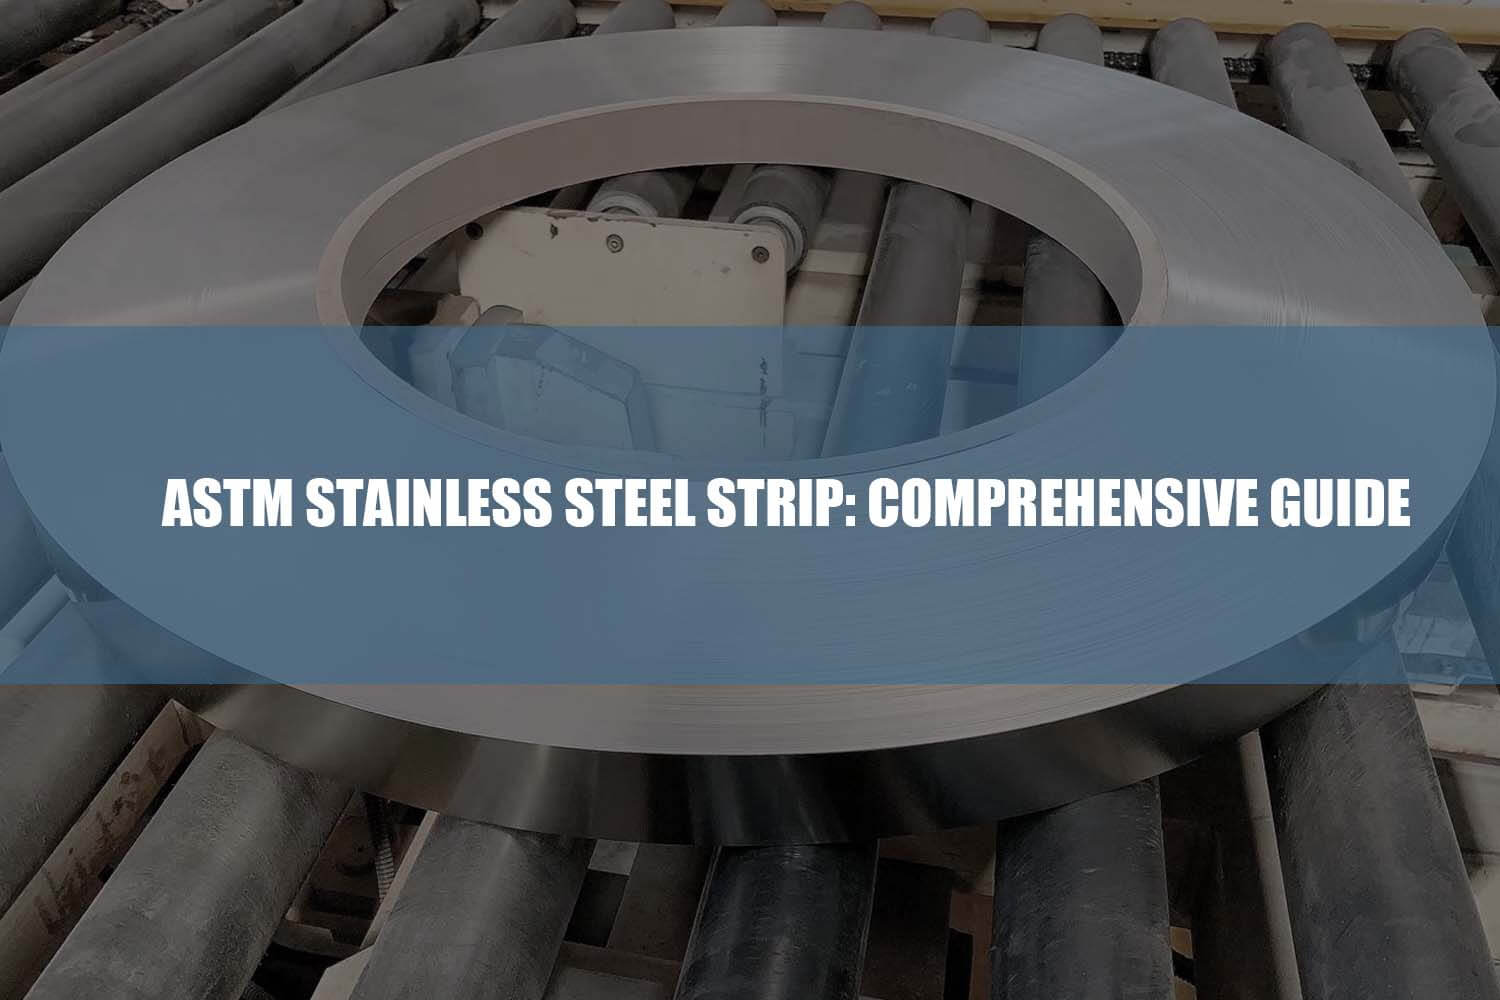 astm stainless steel strip guide